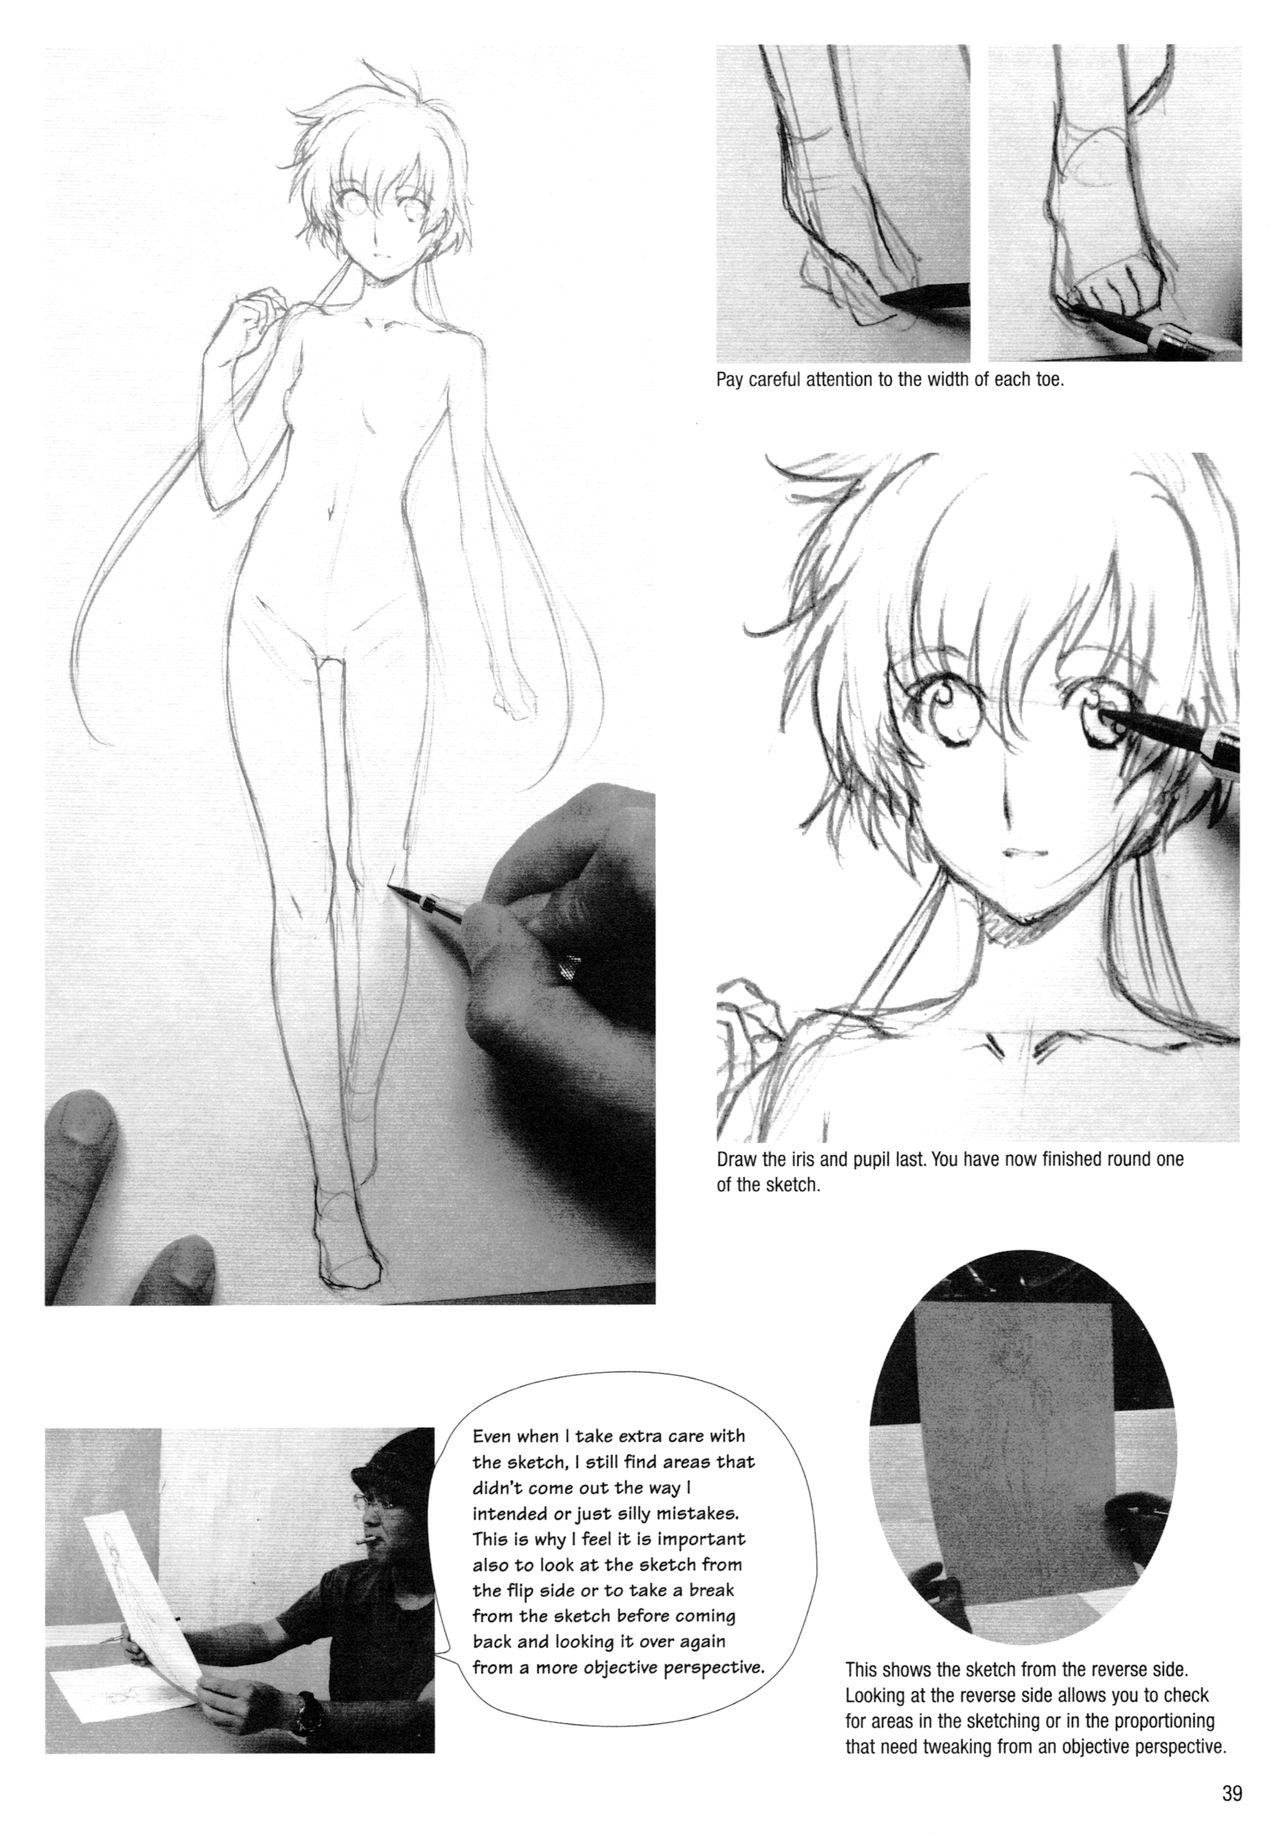 Sketching Manga-Style Vol. 3 - Unforgettable Characters 38